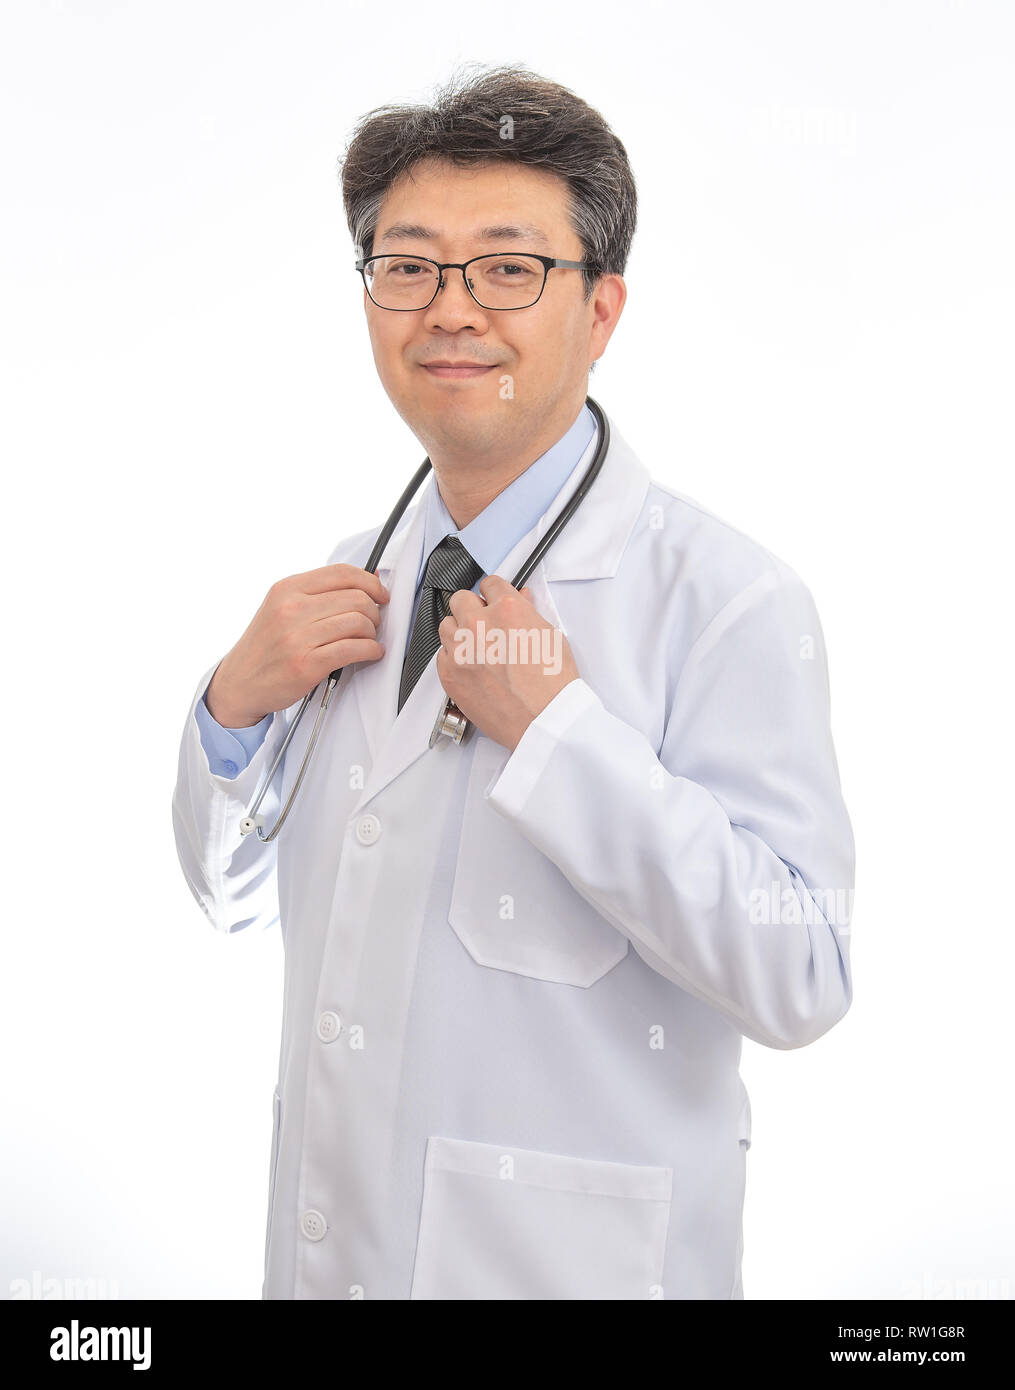 Asian Doctor smiling. isolated on white background. Stock Photo